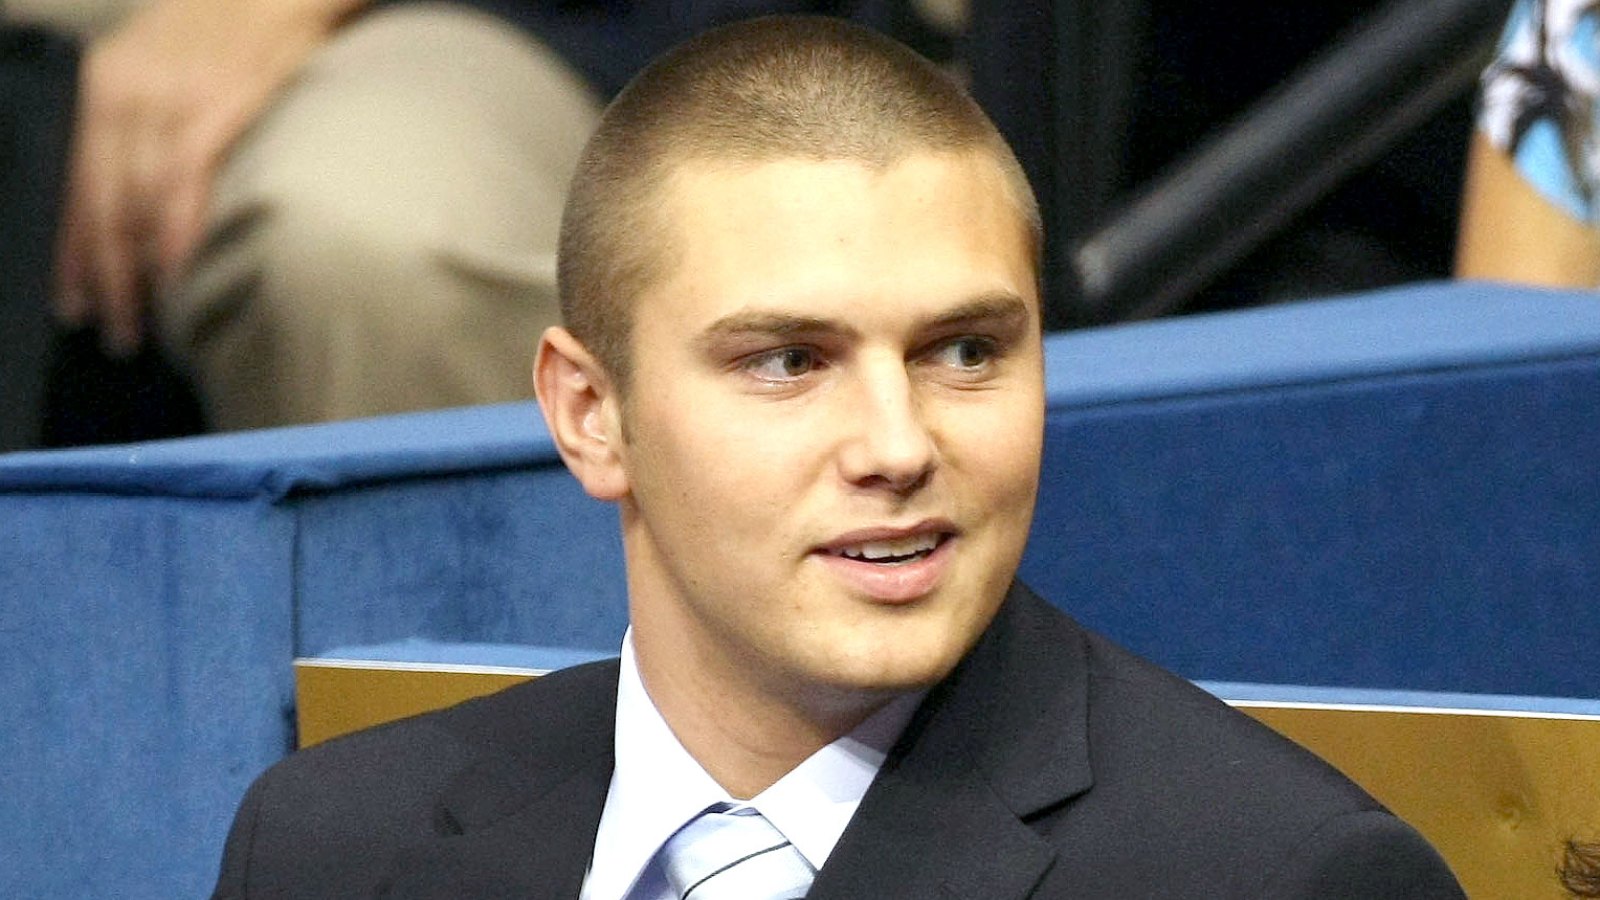 Sarah-Palin-Son- Track-Reportedly- Released-Early-From Halfway-House-2